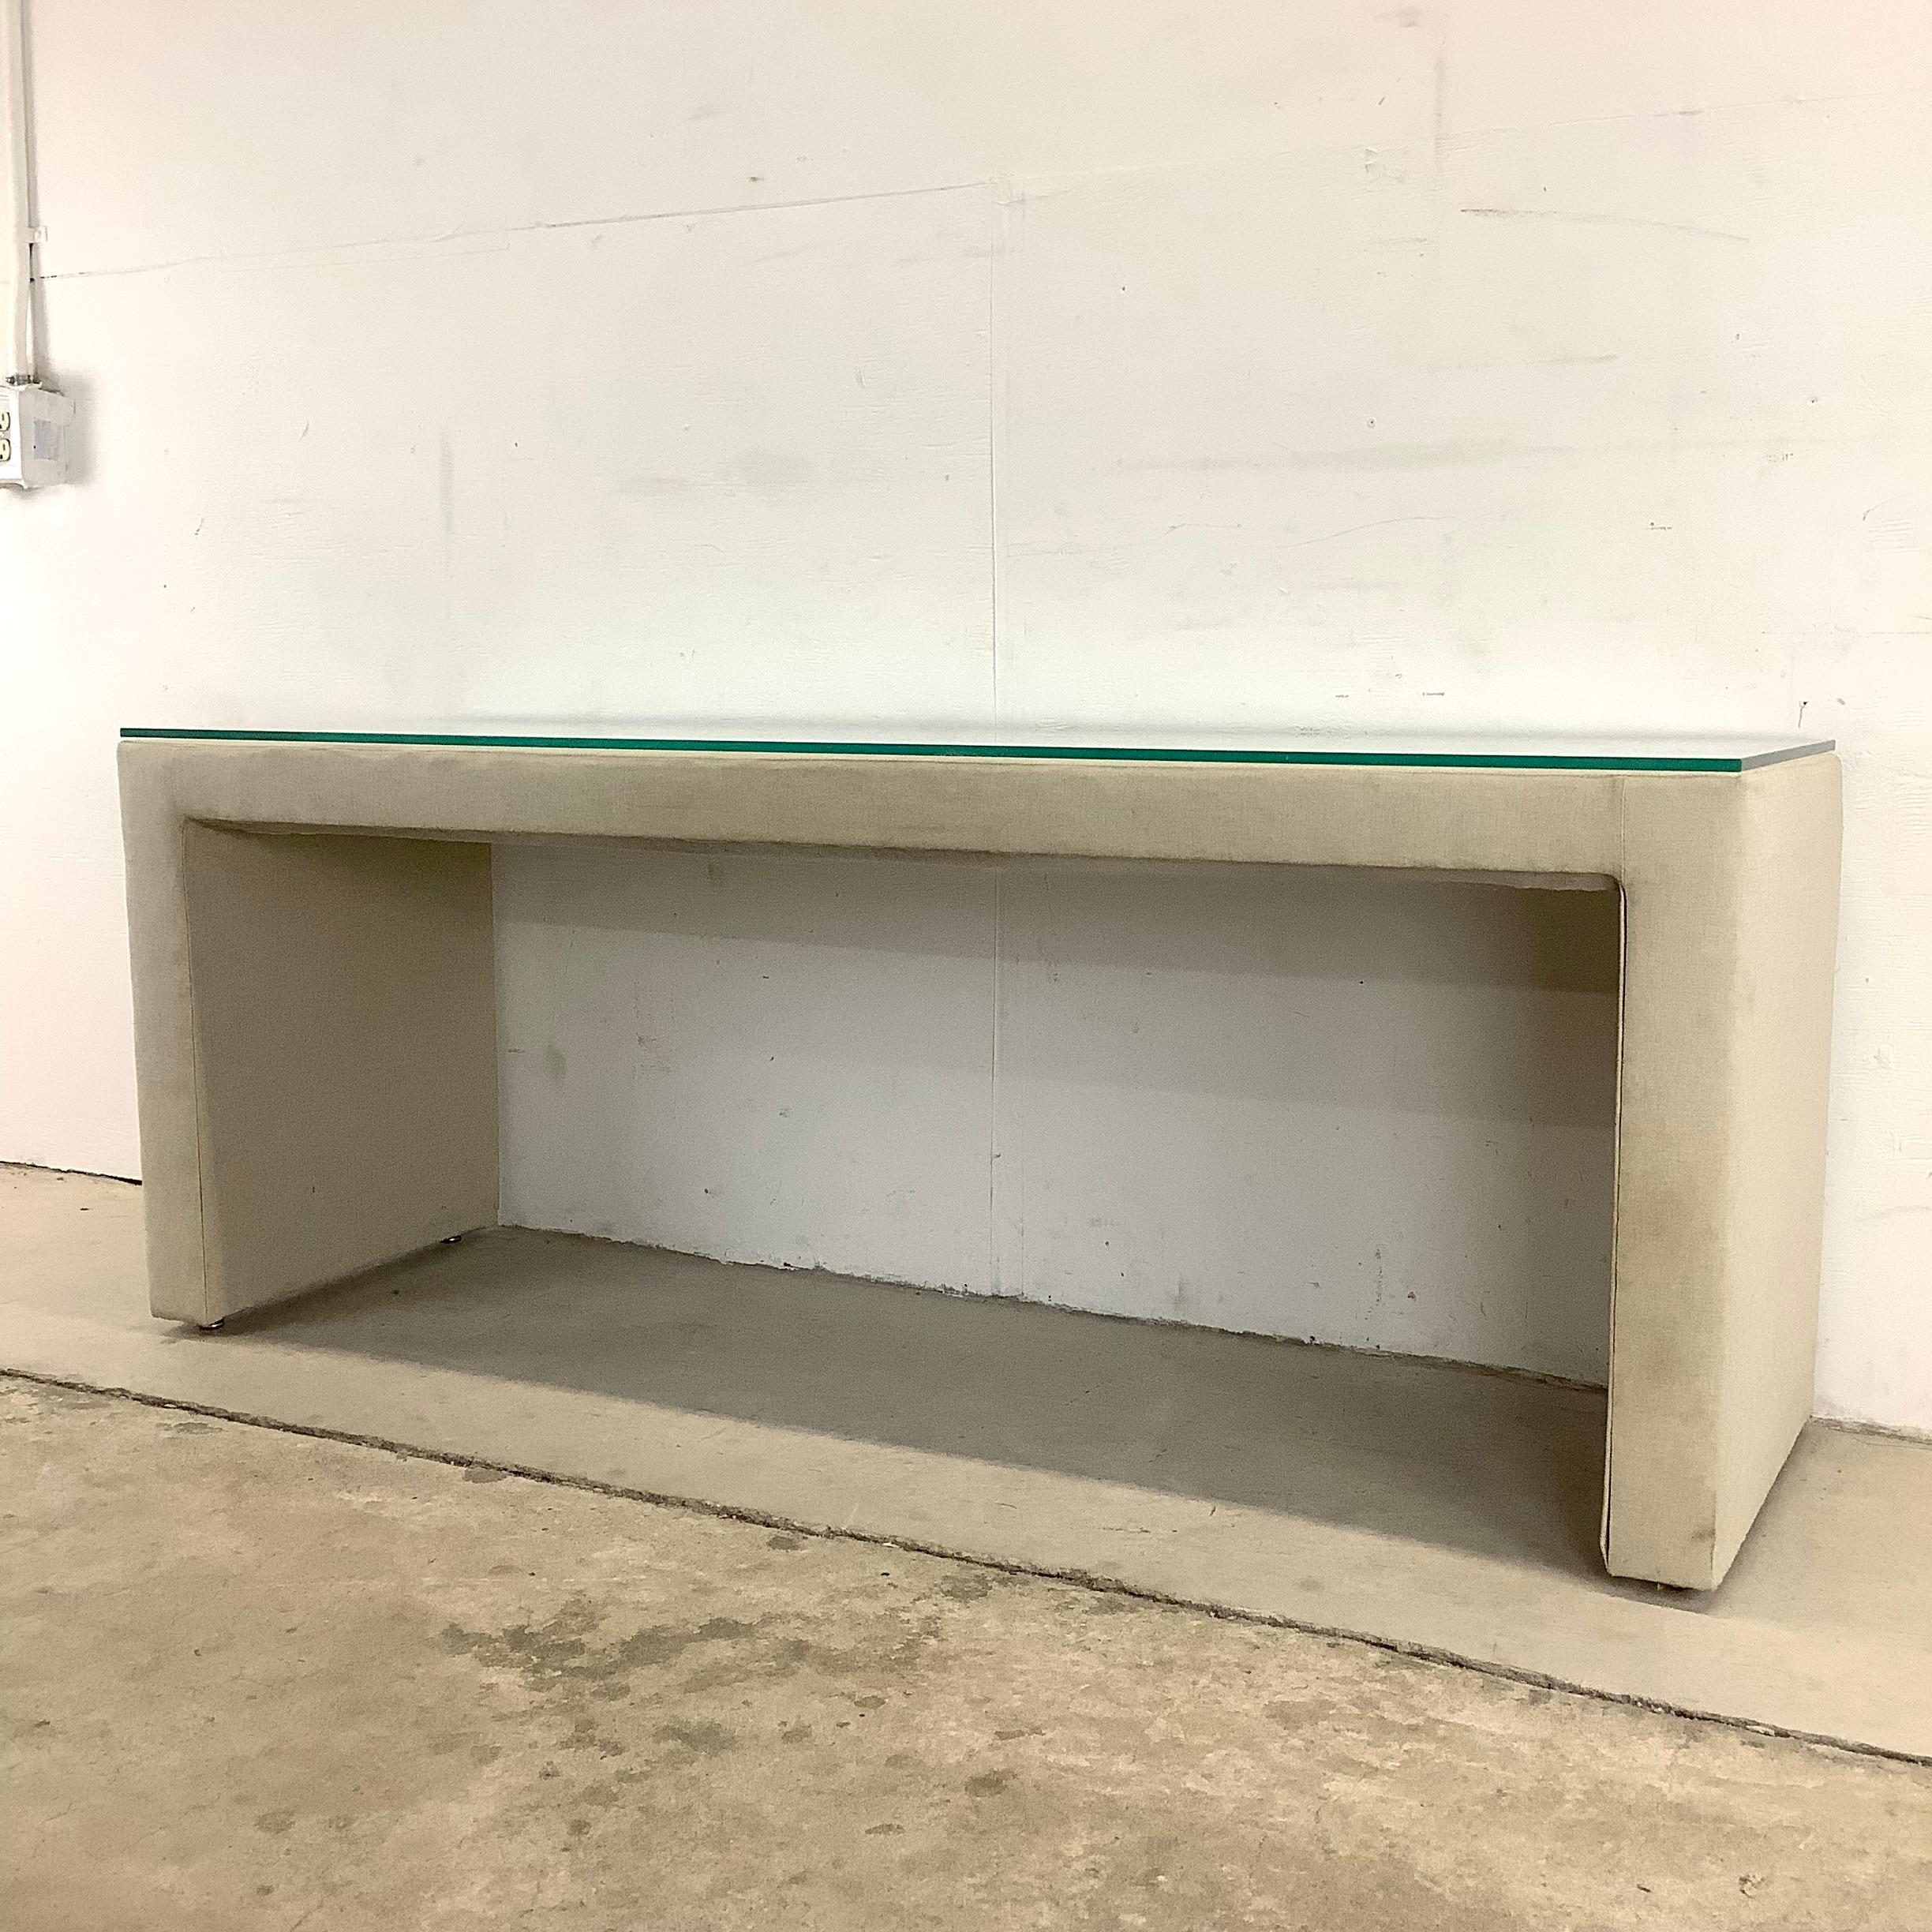 This impressive modern linen console table with removable glass top makes a stylish yet unimposing occasional table for any setting. Unique height and wide sturdy construction make it excellent for display in every room from home entryway to